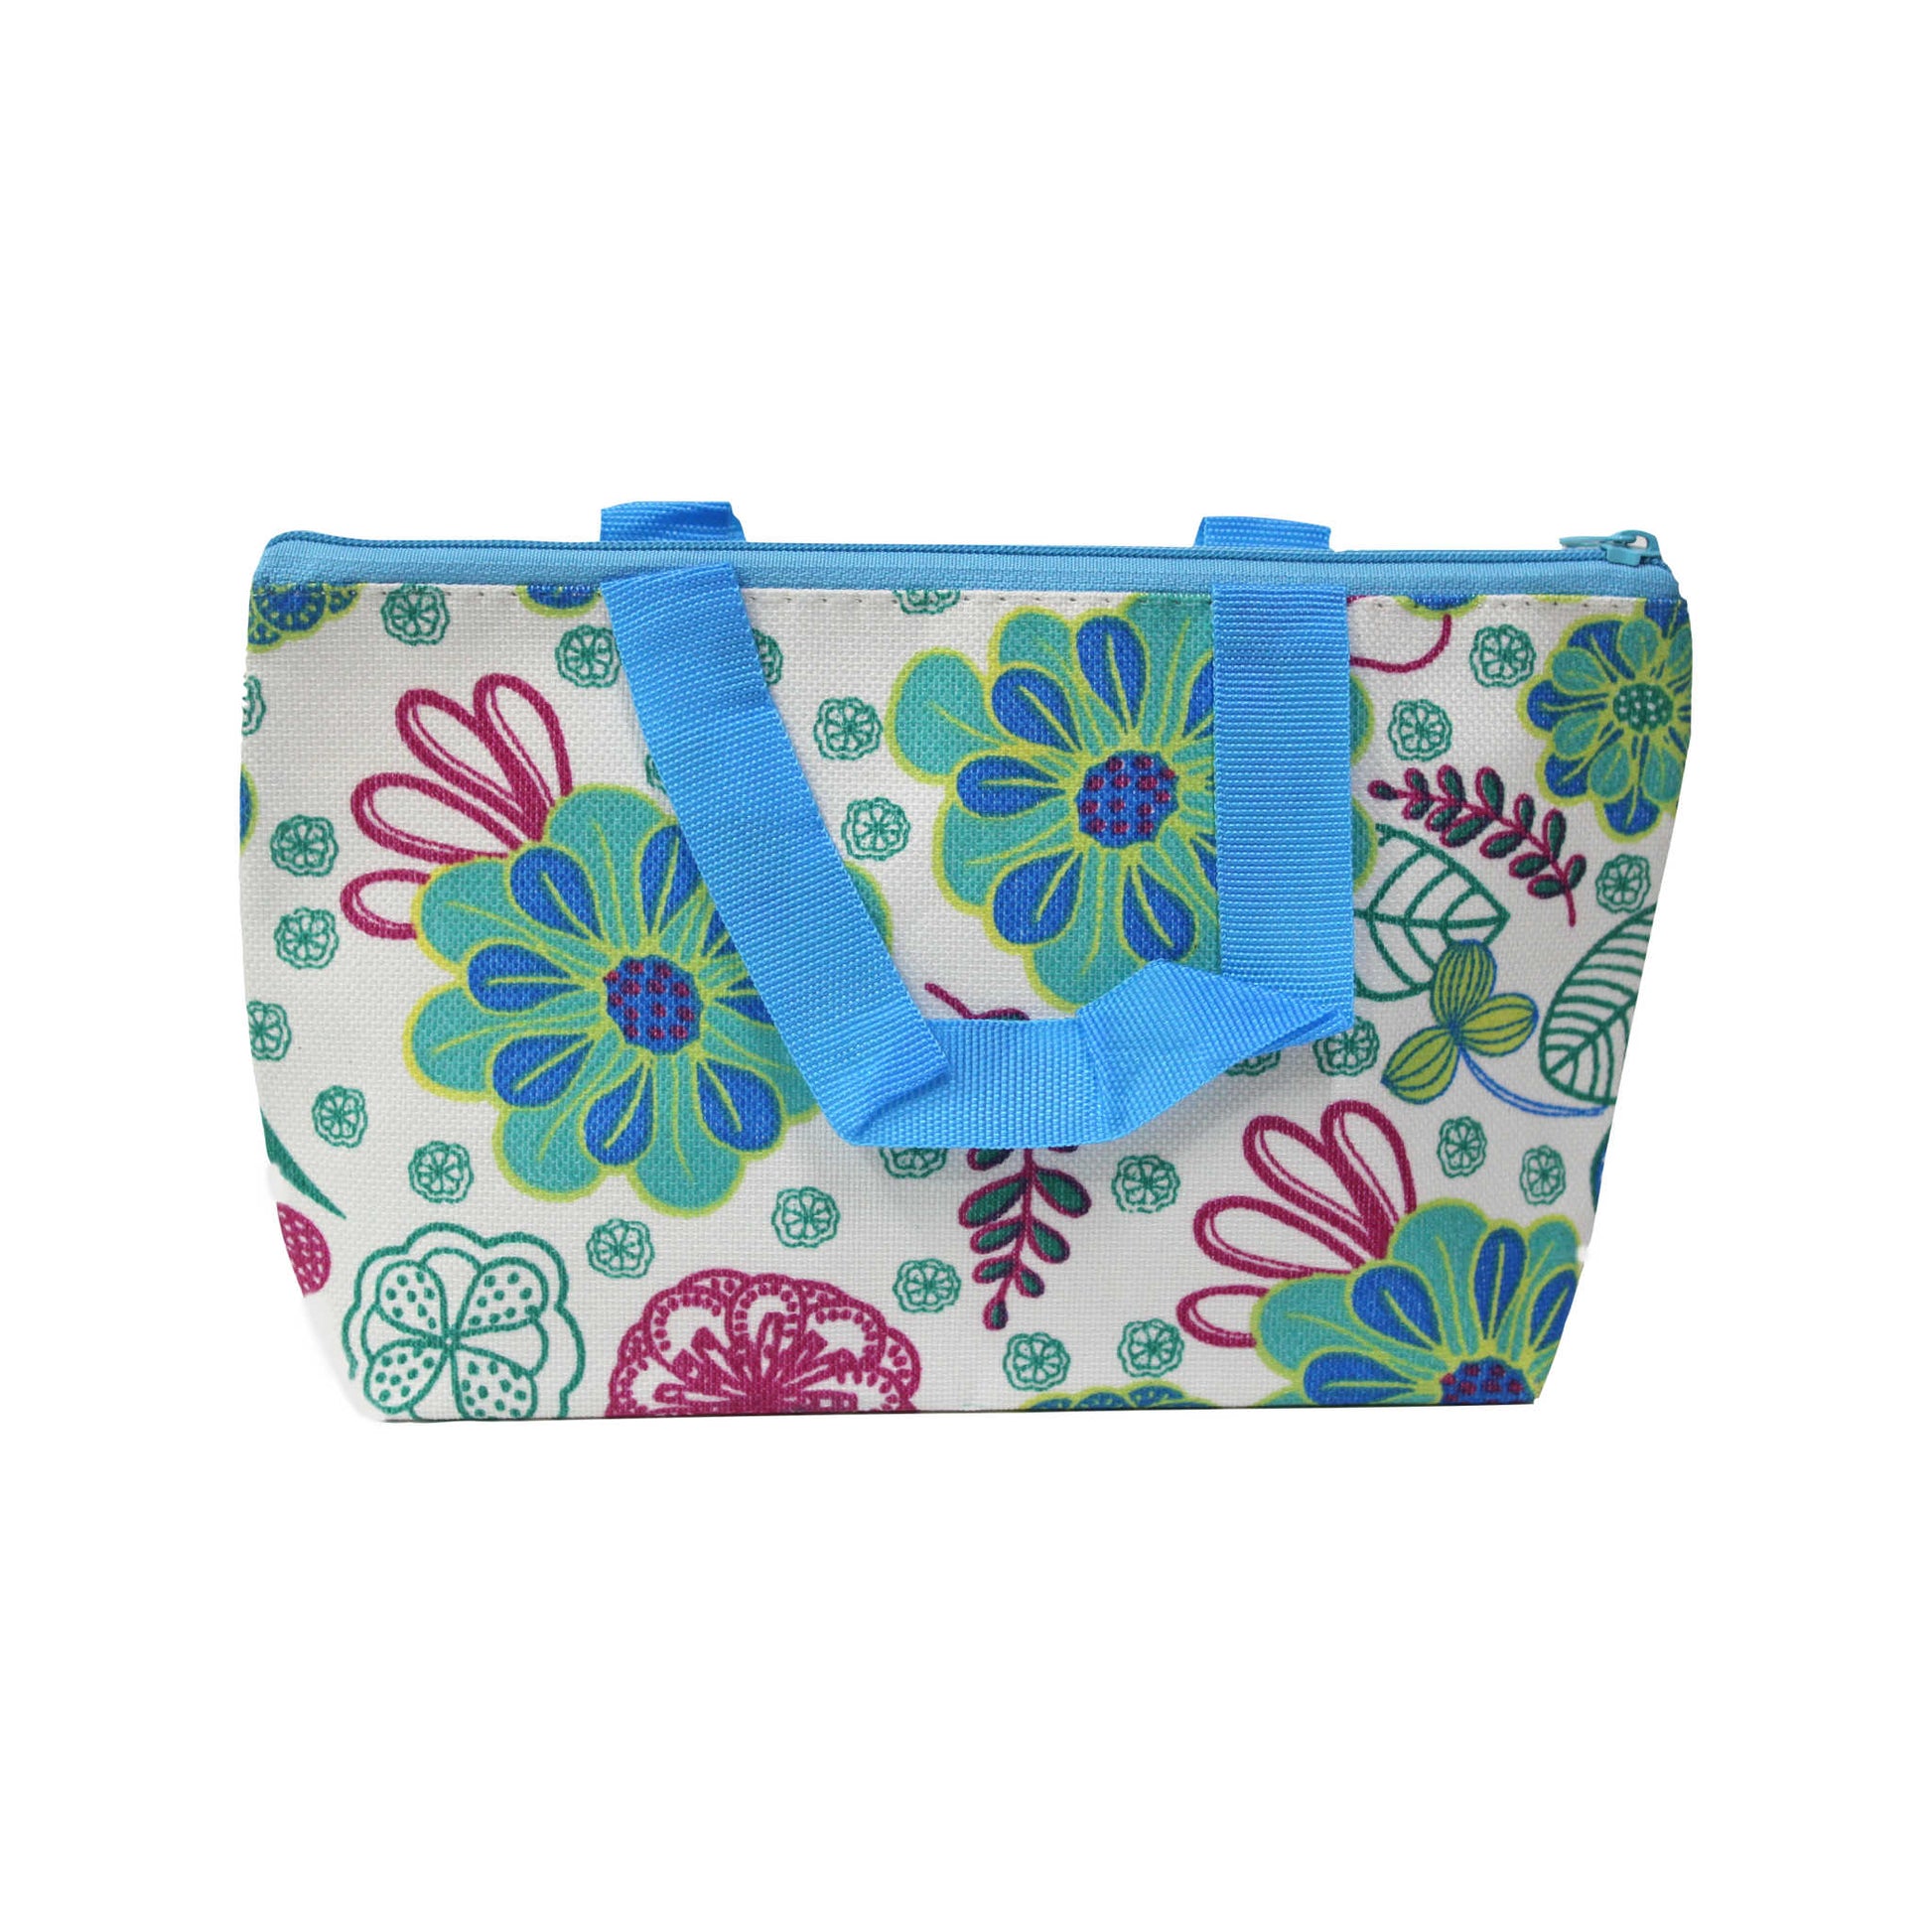 Indian Petals Imported Durable Canvas Printed multi purpose utility Small Bag with handles for all occasions for the girls and ladies, Theme Floral, Design 14, Blue